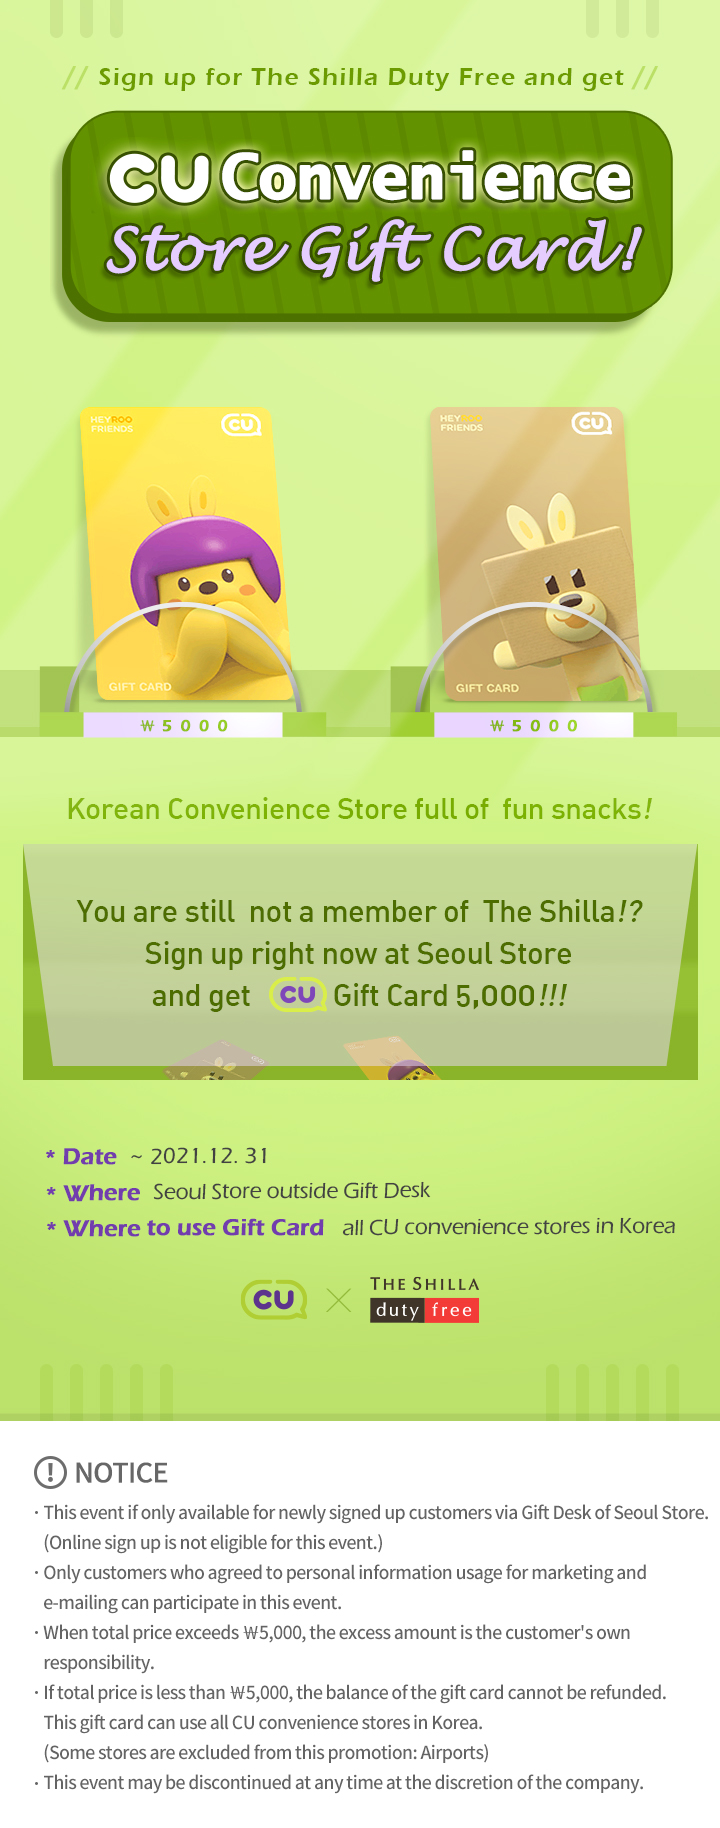 Sign up now and get the gift card of the convenience store!